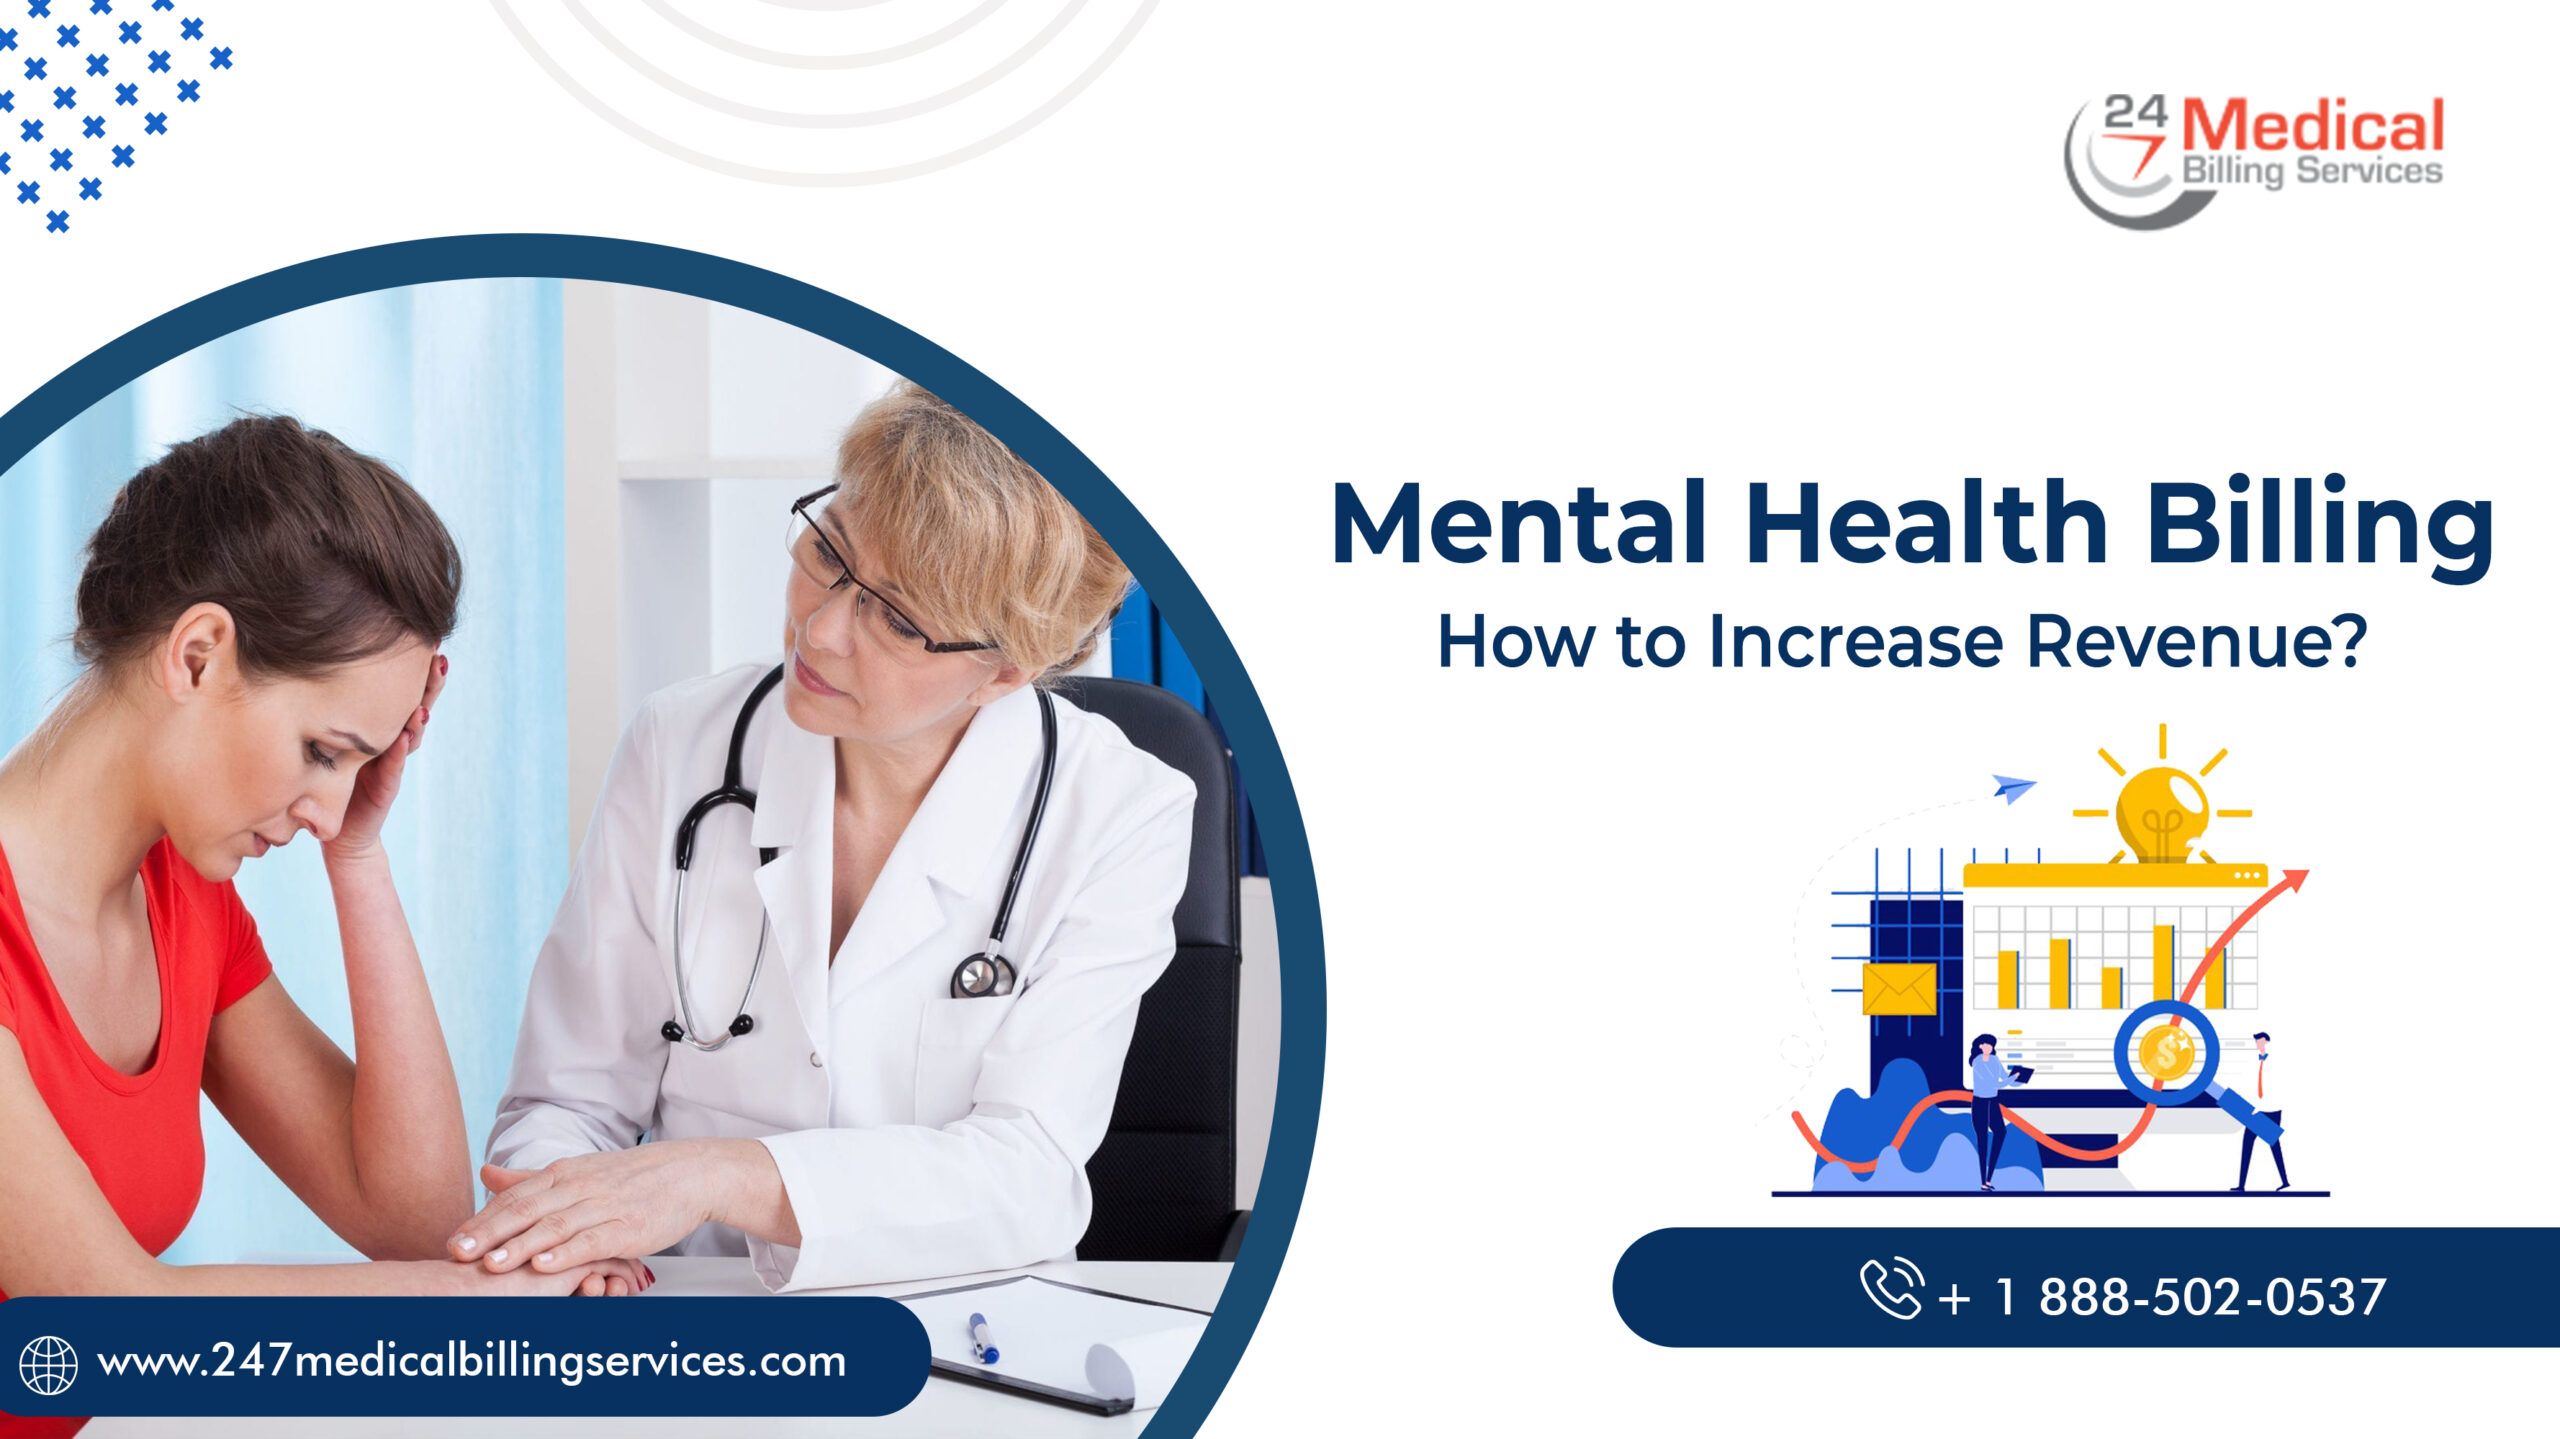  How to Increase Revenue Collections in Mental Health Billing?